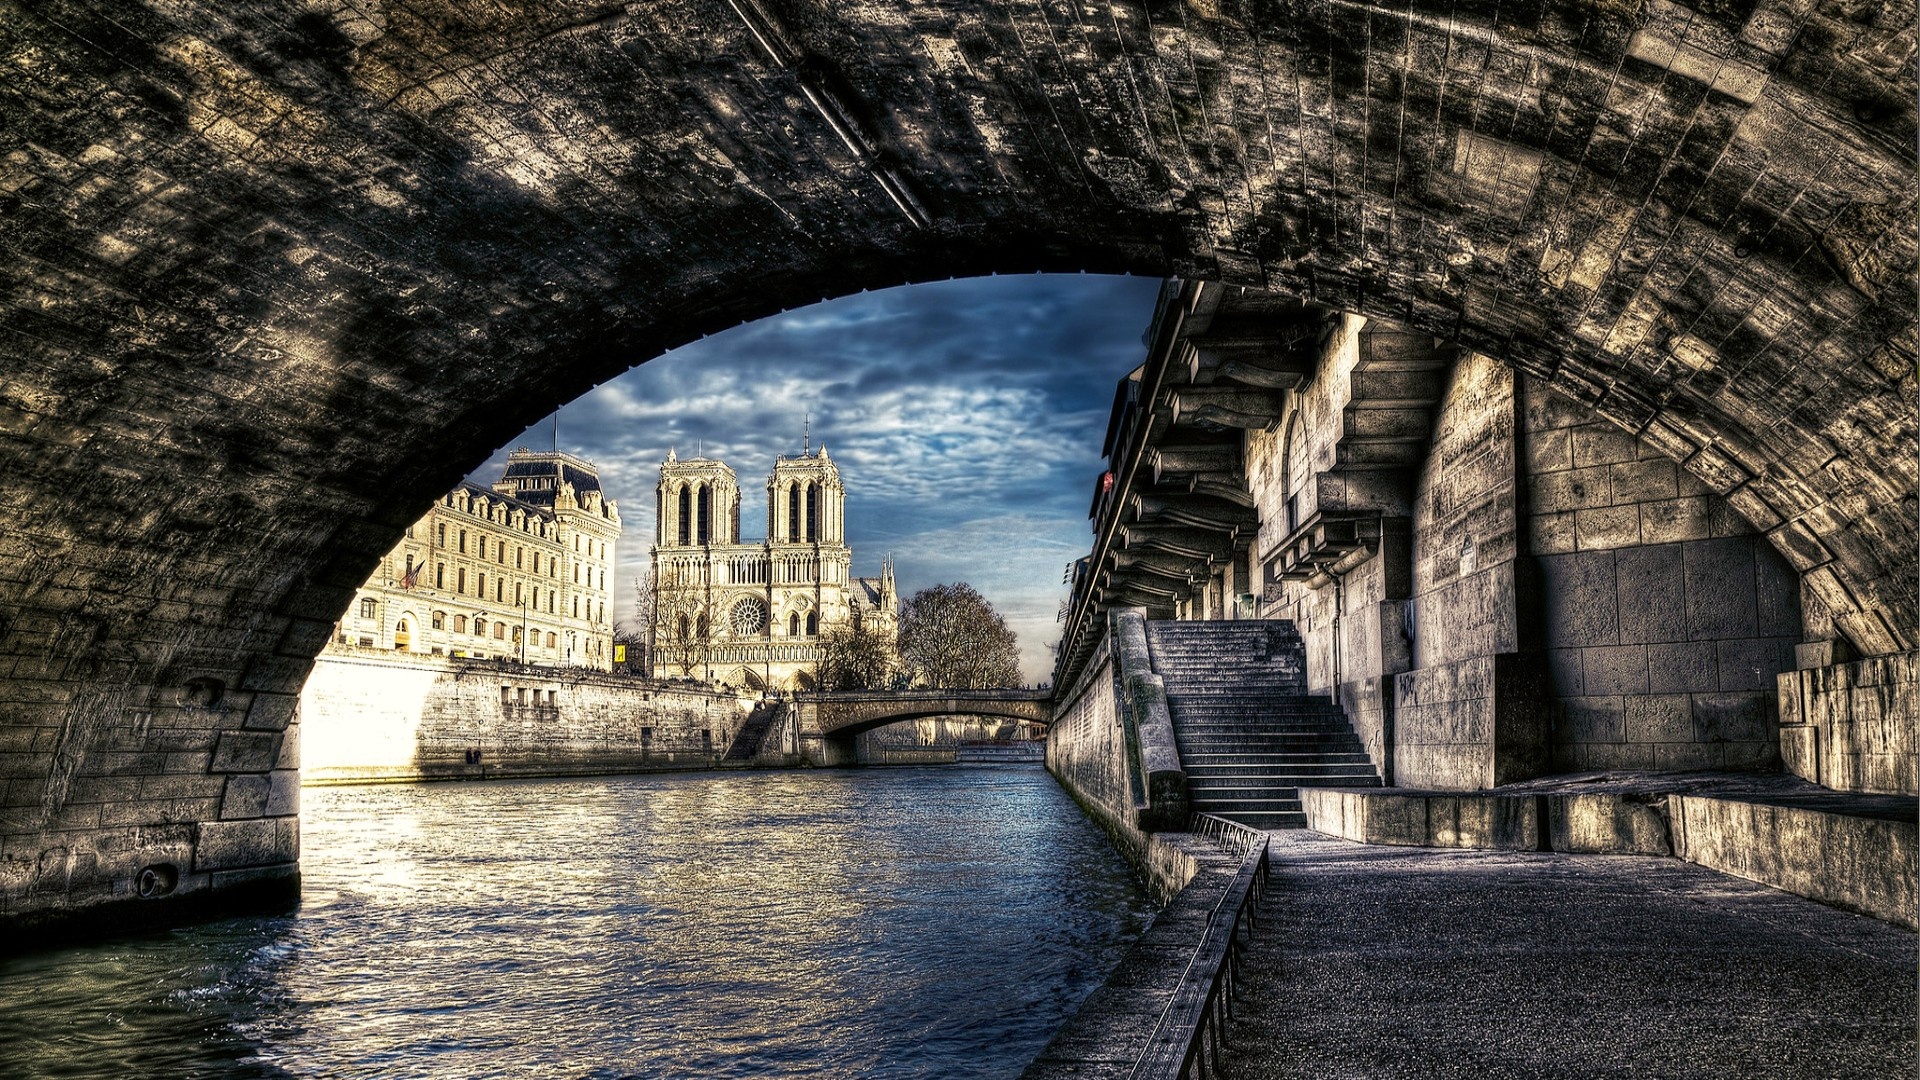 35 HD Paris Backgrounds: The City Of Lights And Romance